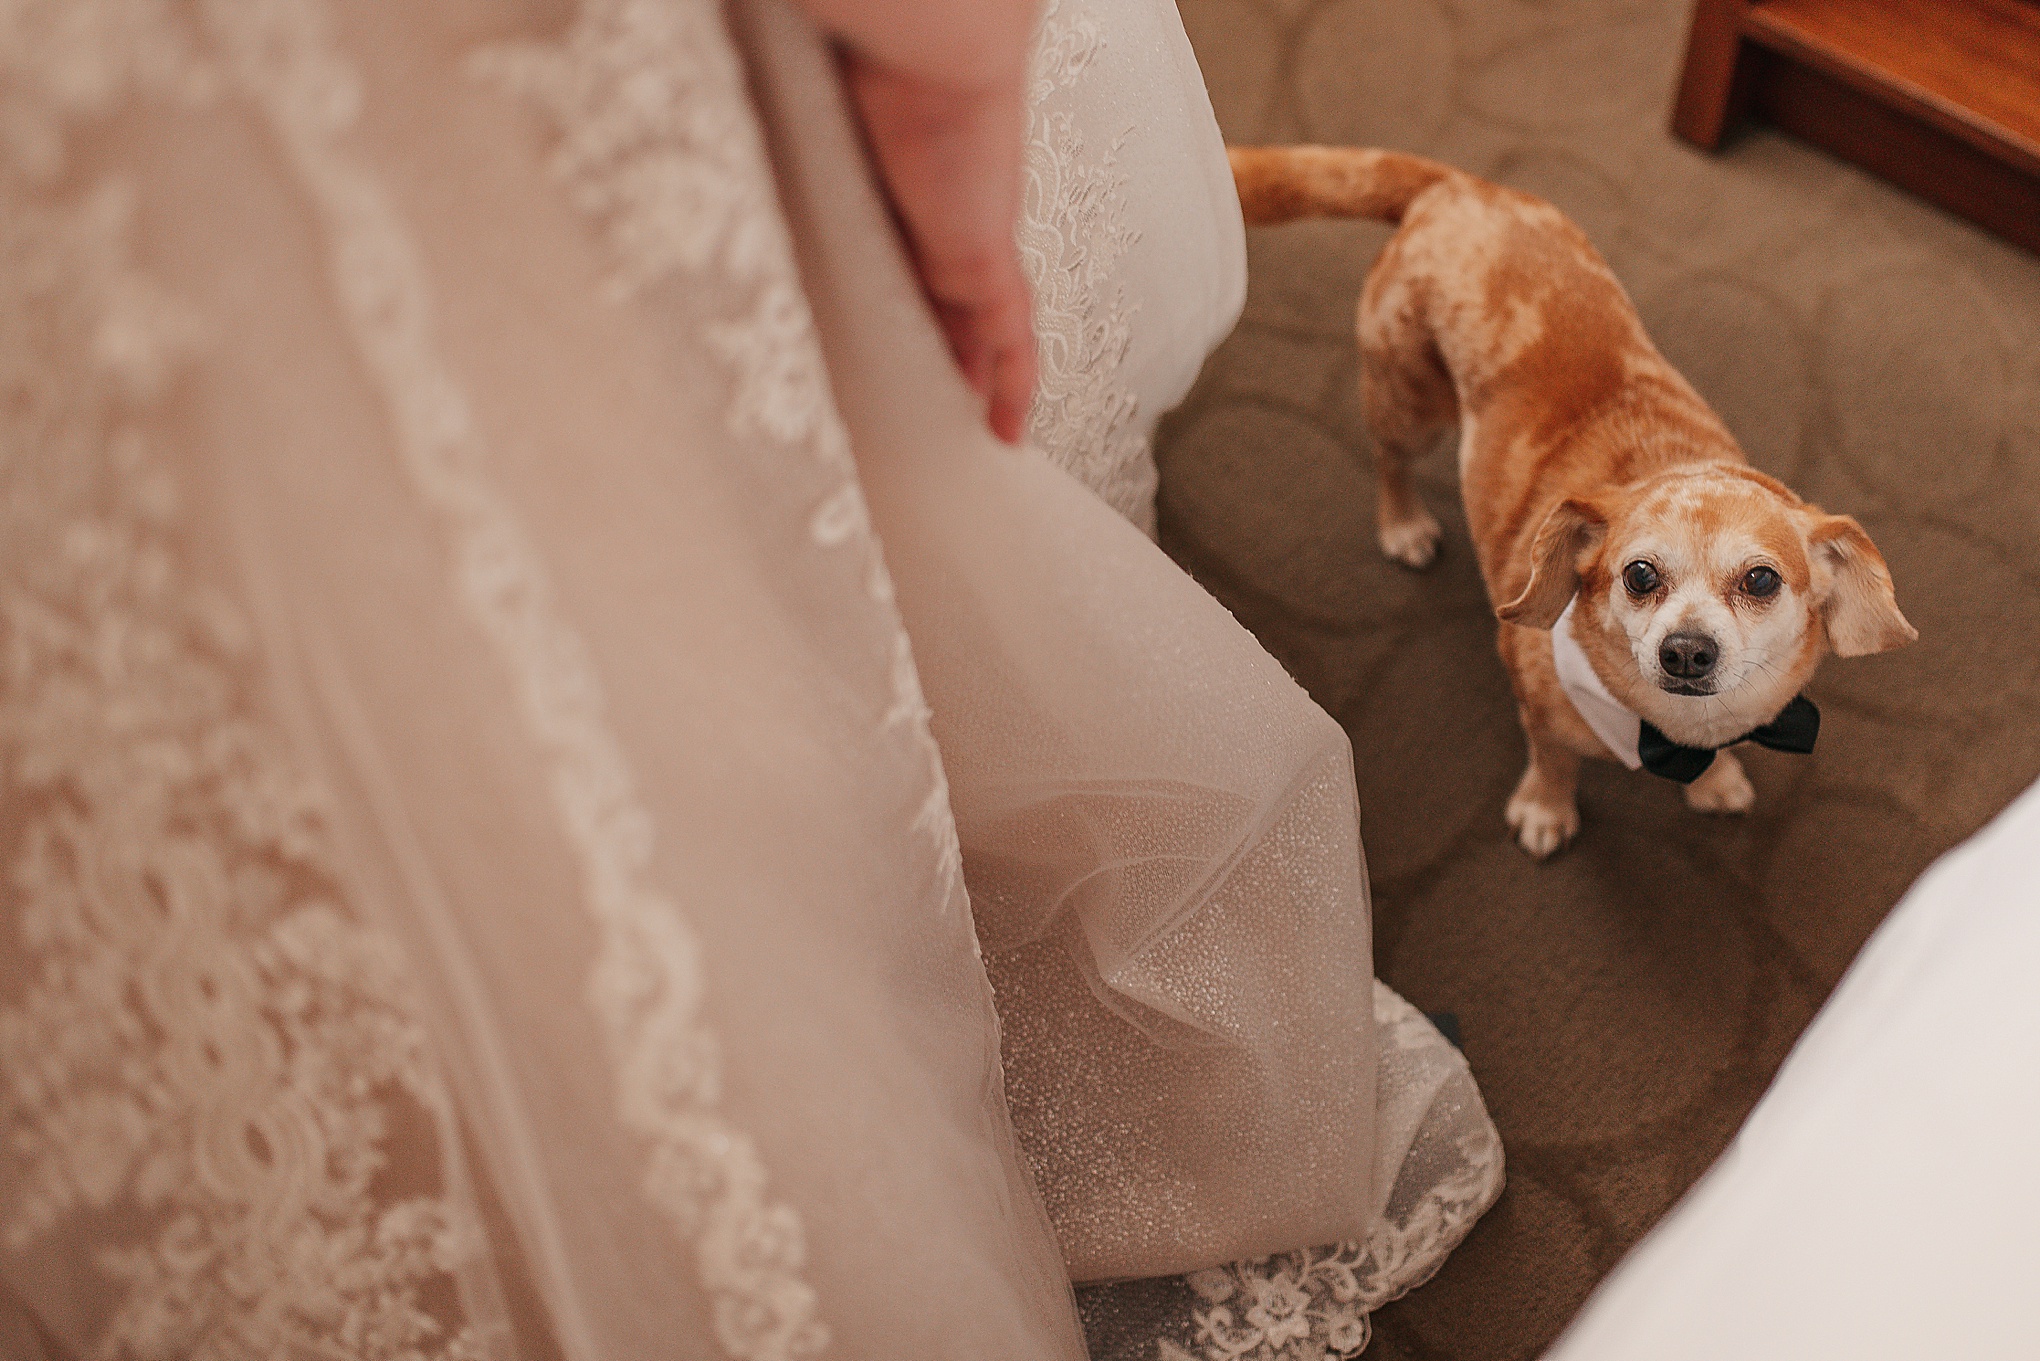 Tips for dogs on wedding days